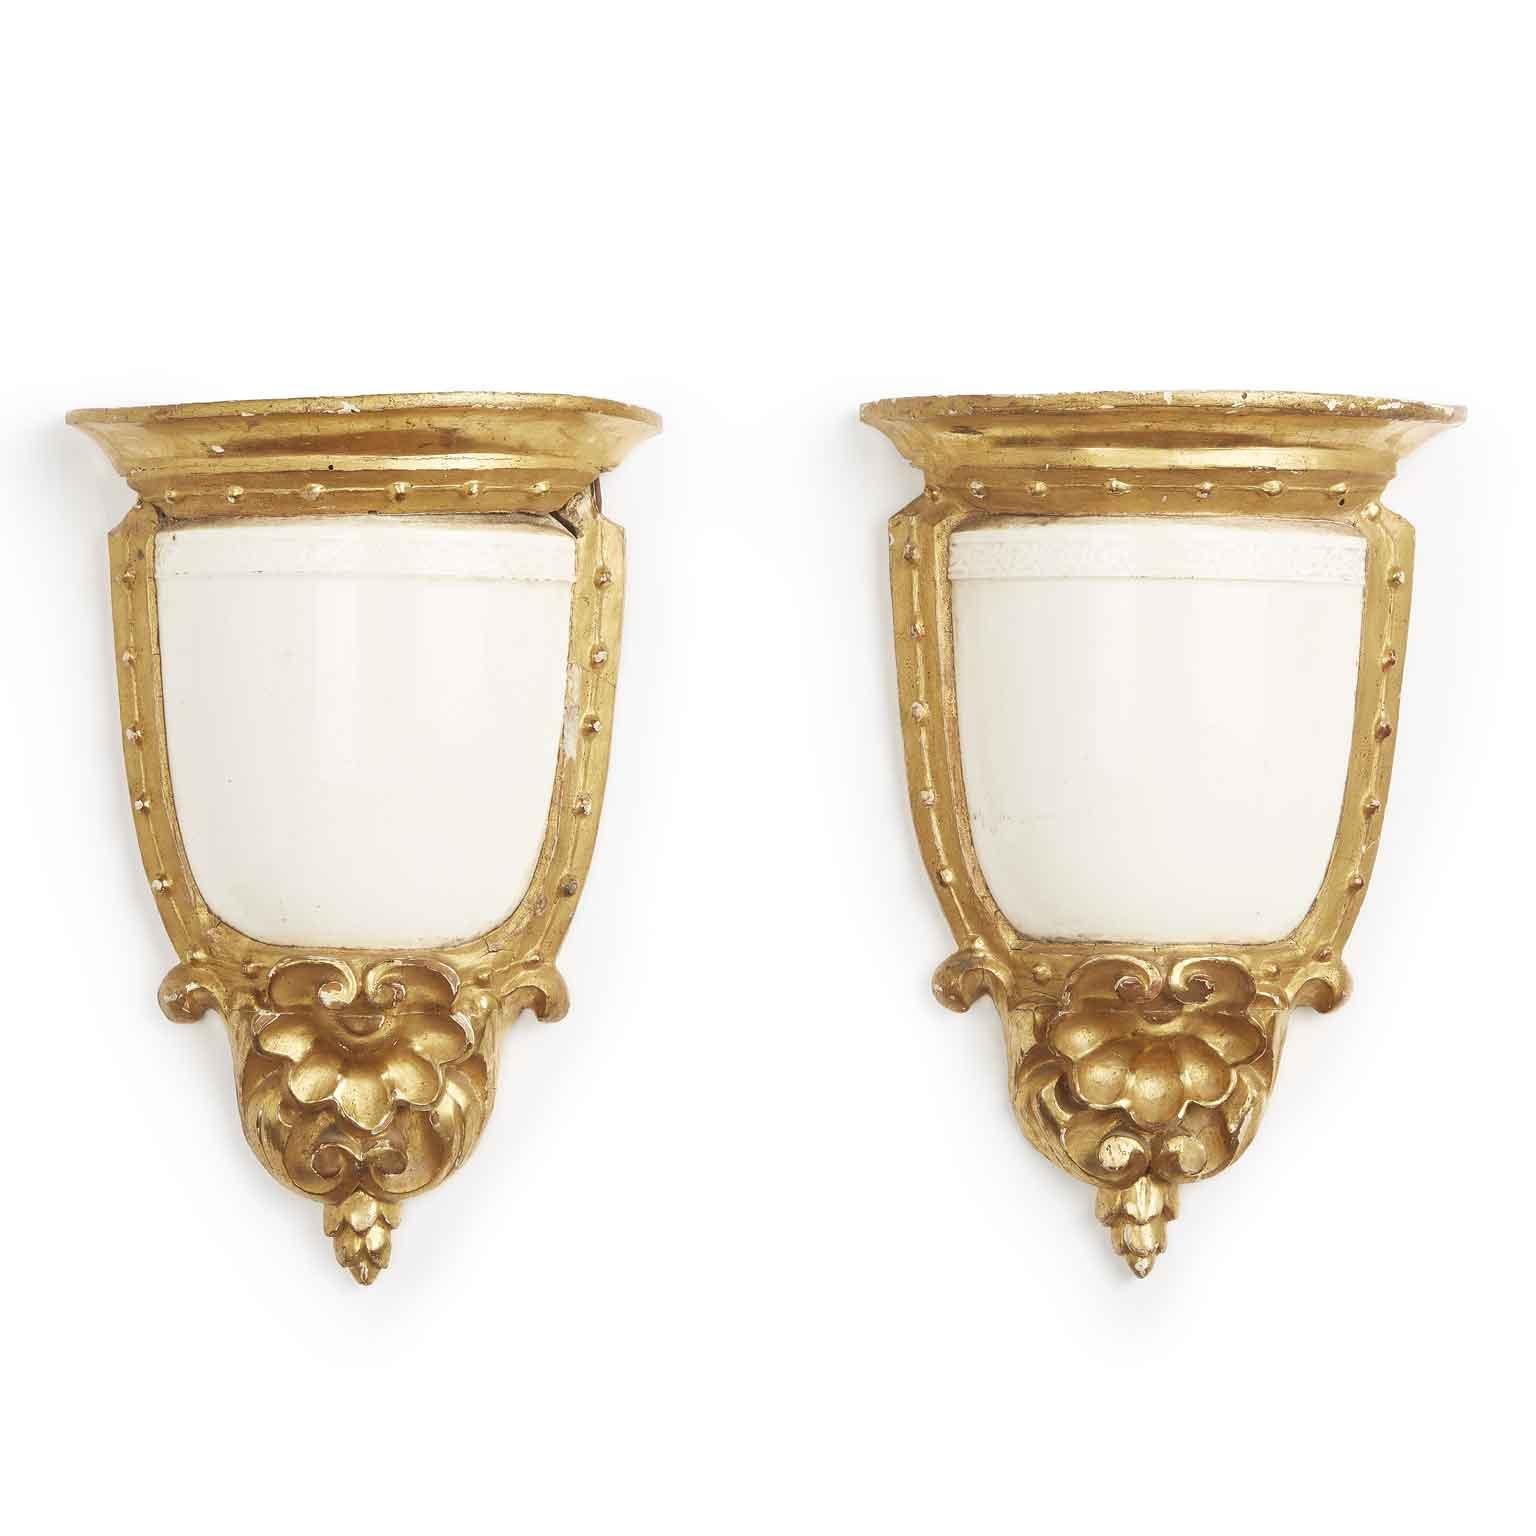 Giltwood 19th Century Italian Neoclassical Majolica Pair of Wall Brackets for Sconces For Sale